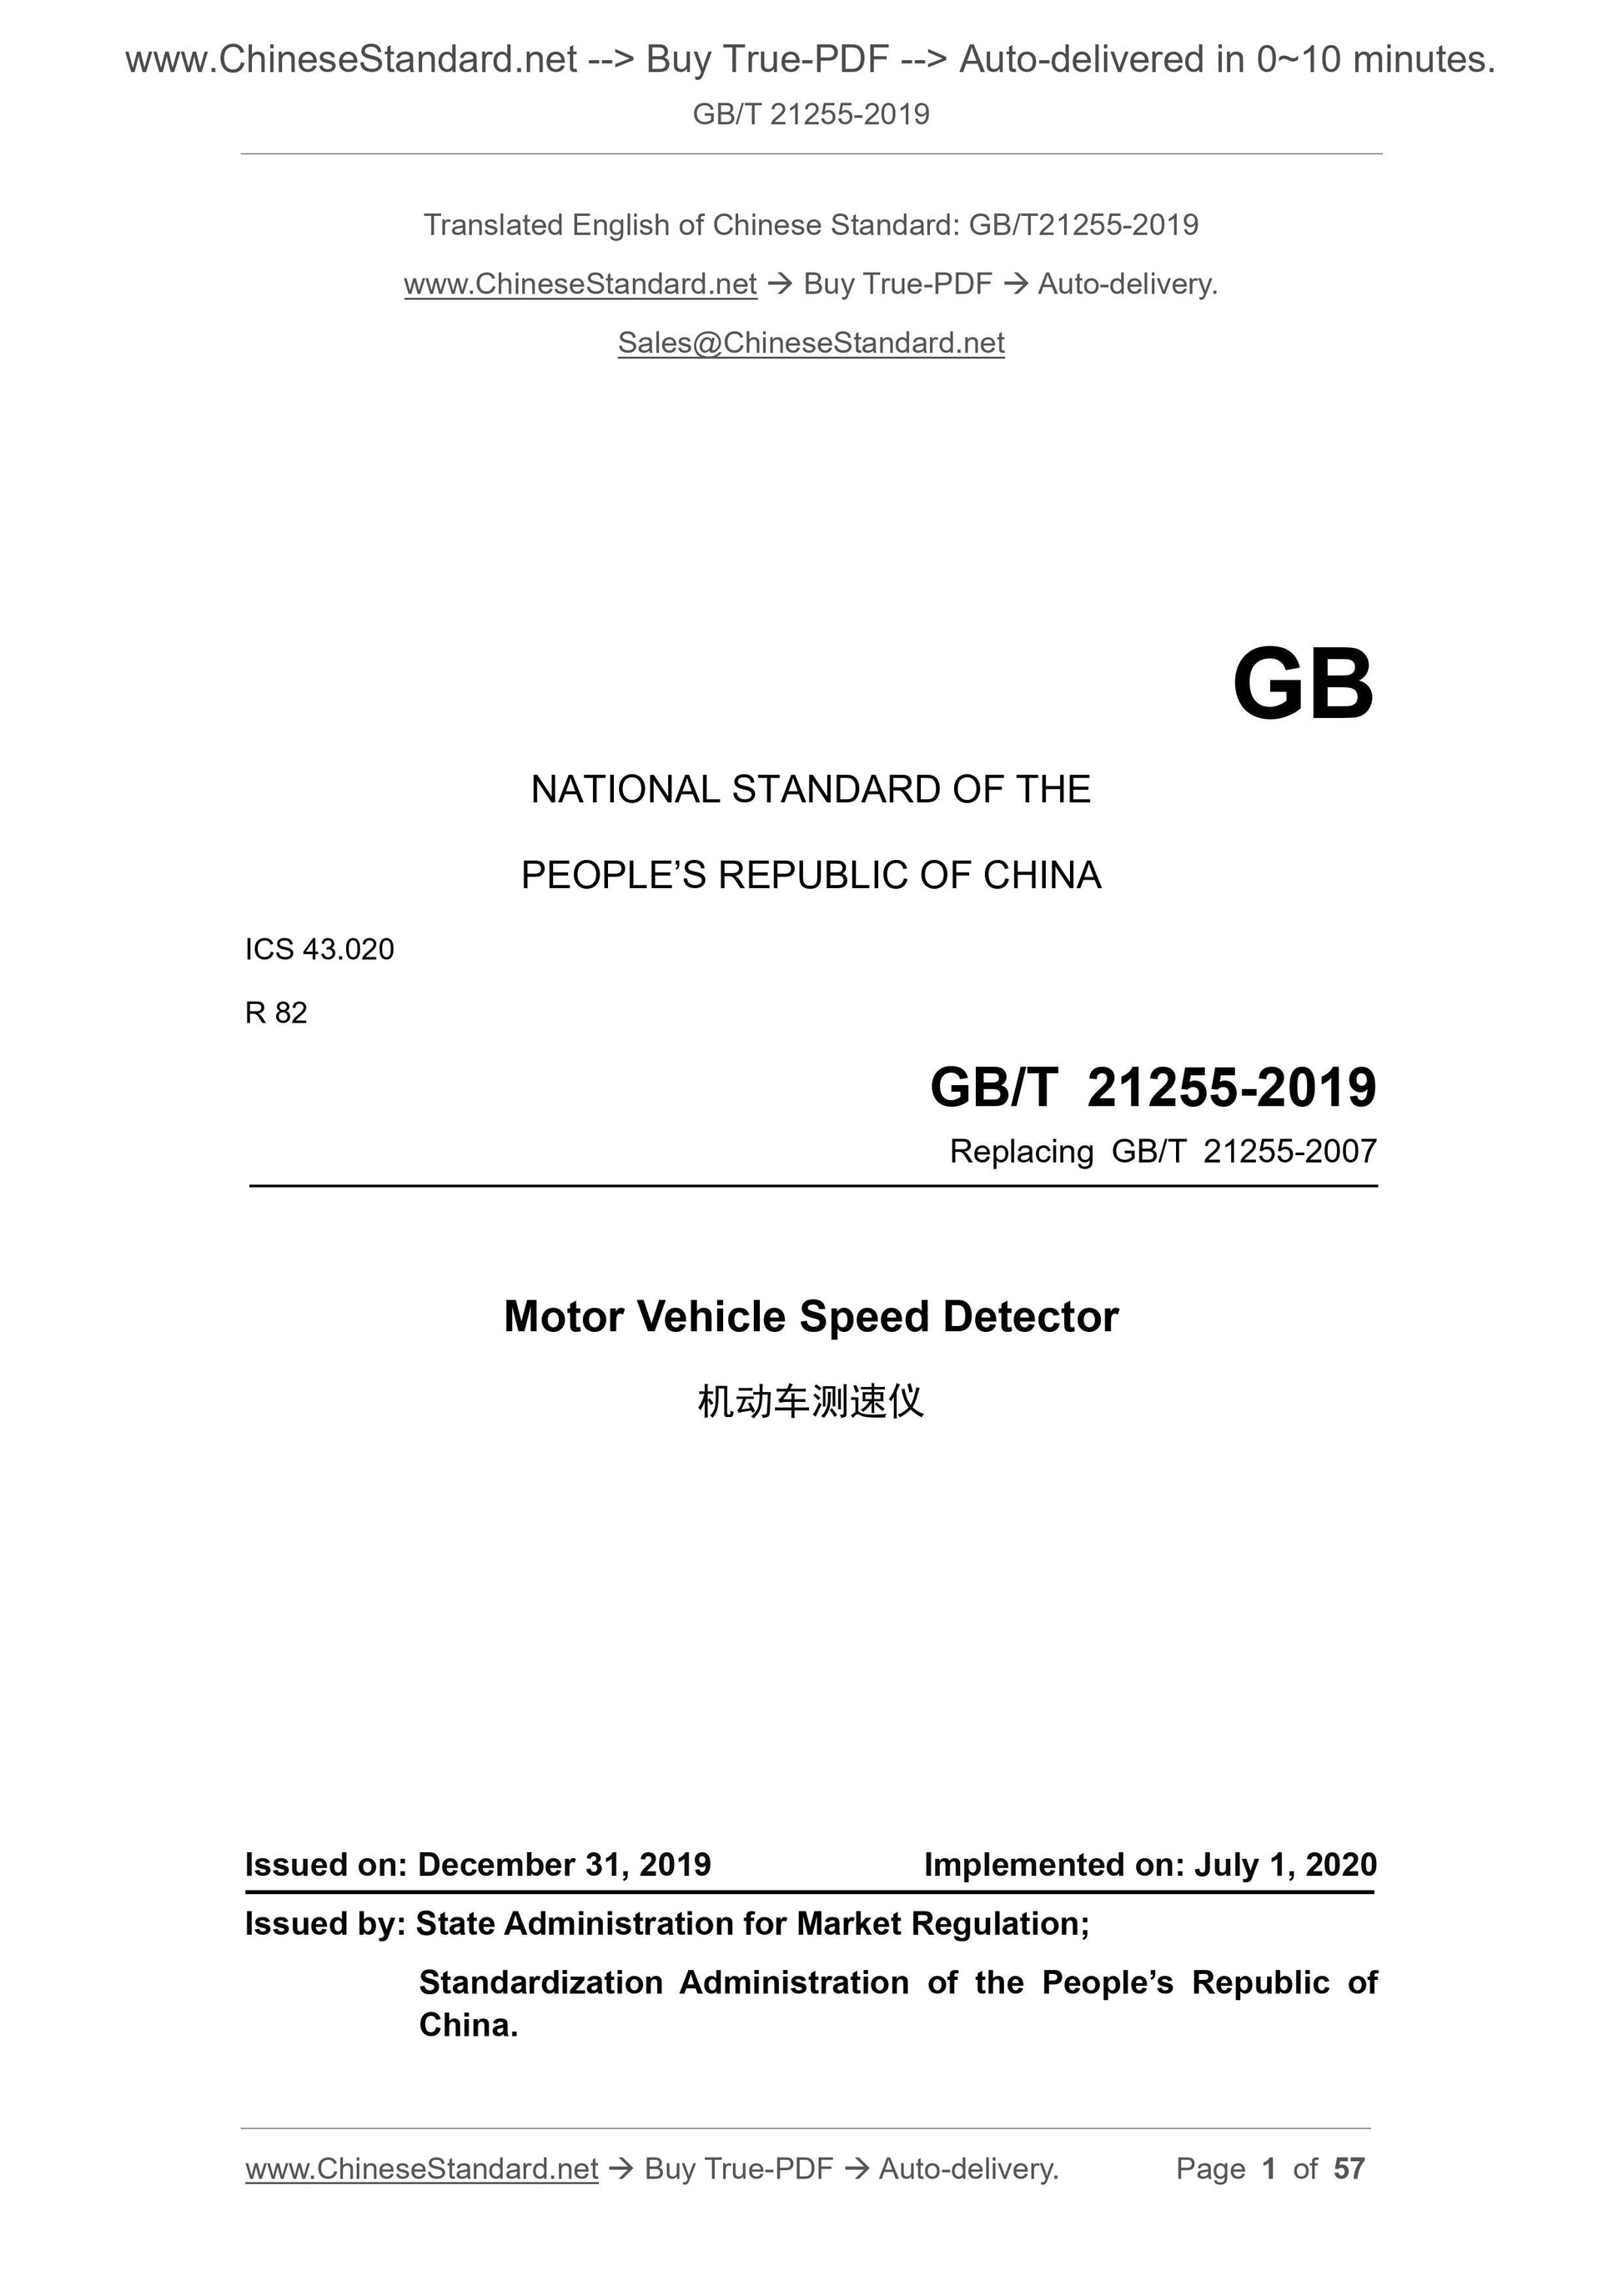 GB/T 21255-2019 Page 1